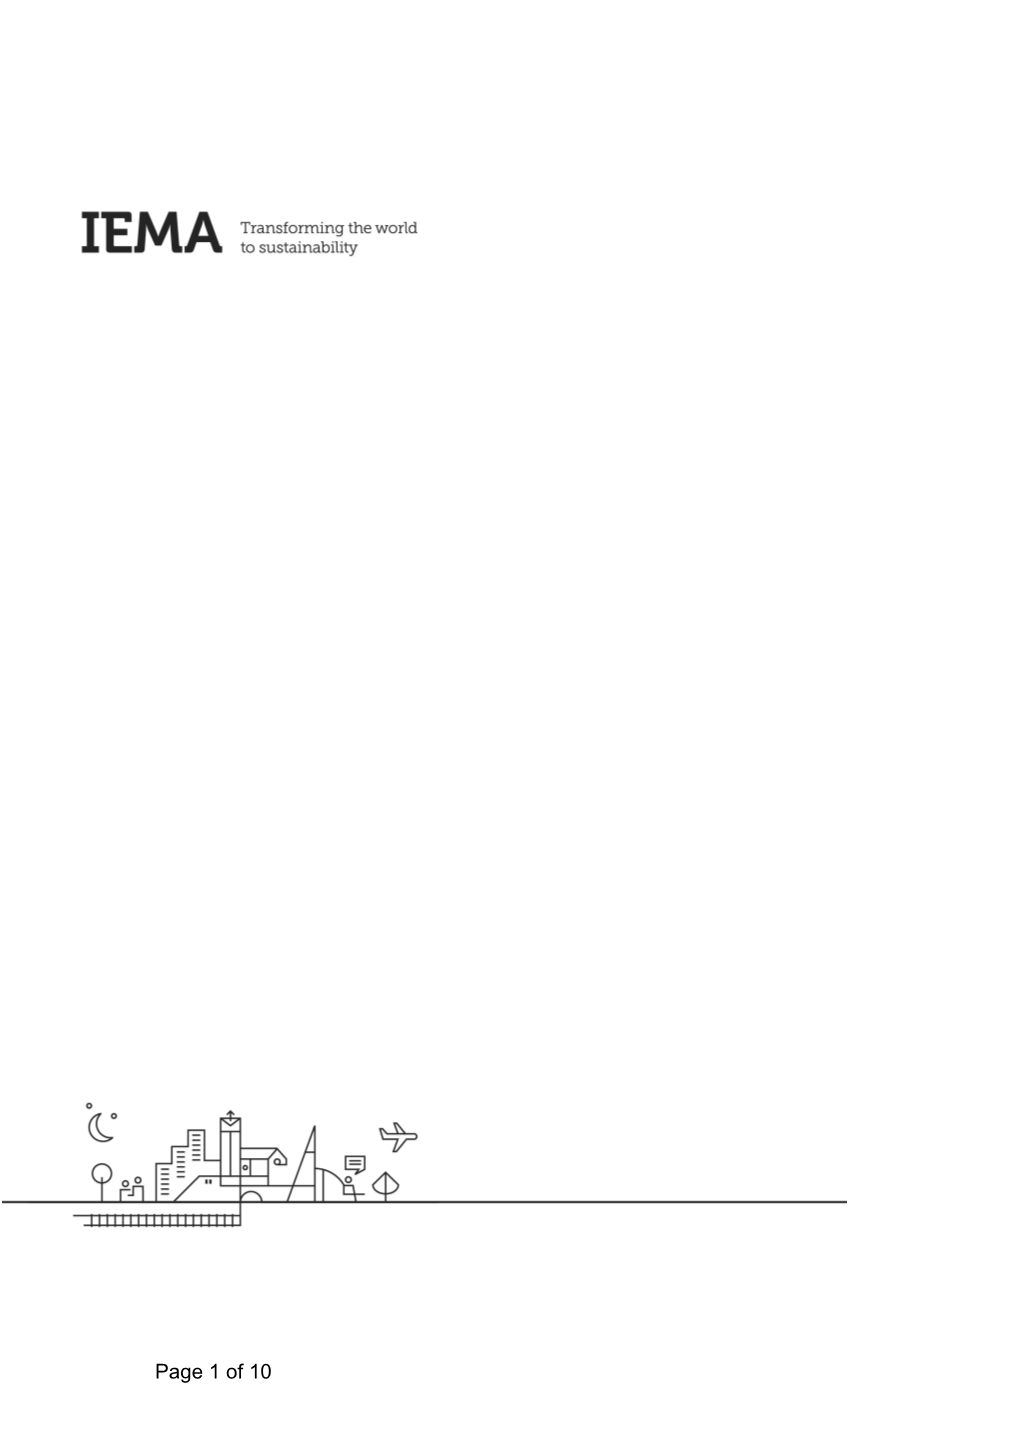 IEMA Is the Professional Home of Over 14,000 Environment and Sustainability Professionals